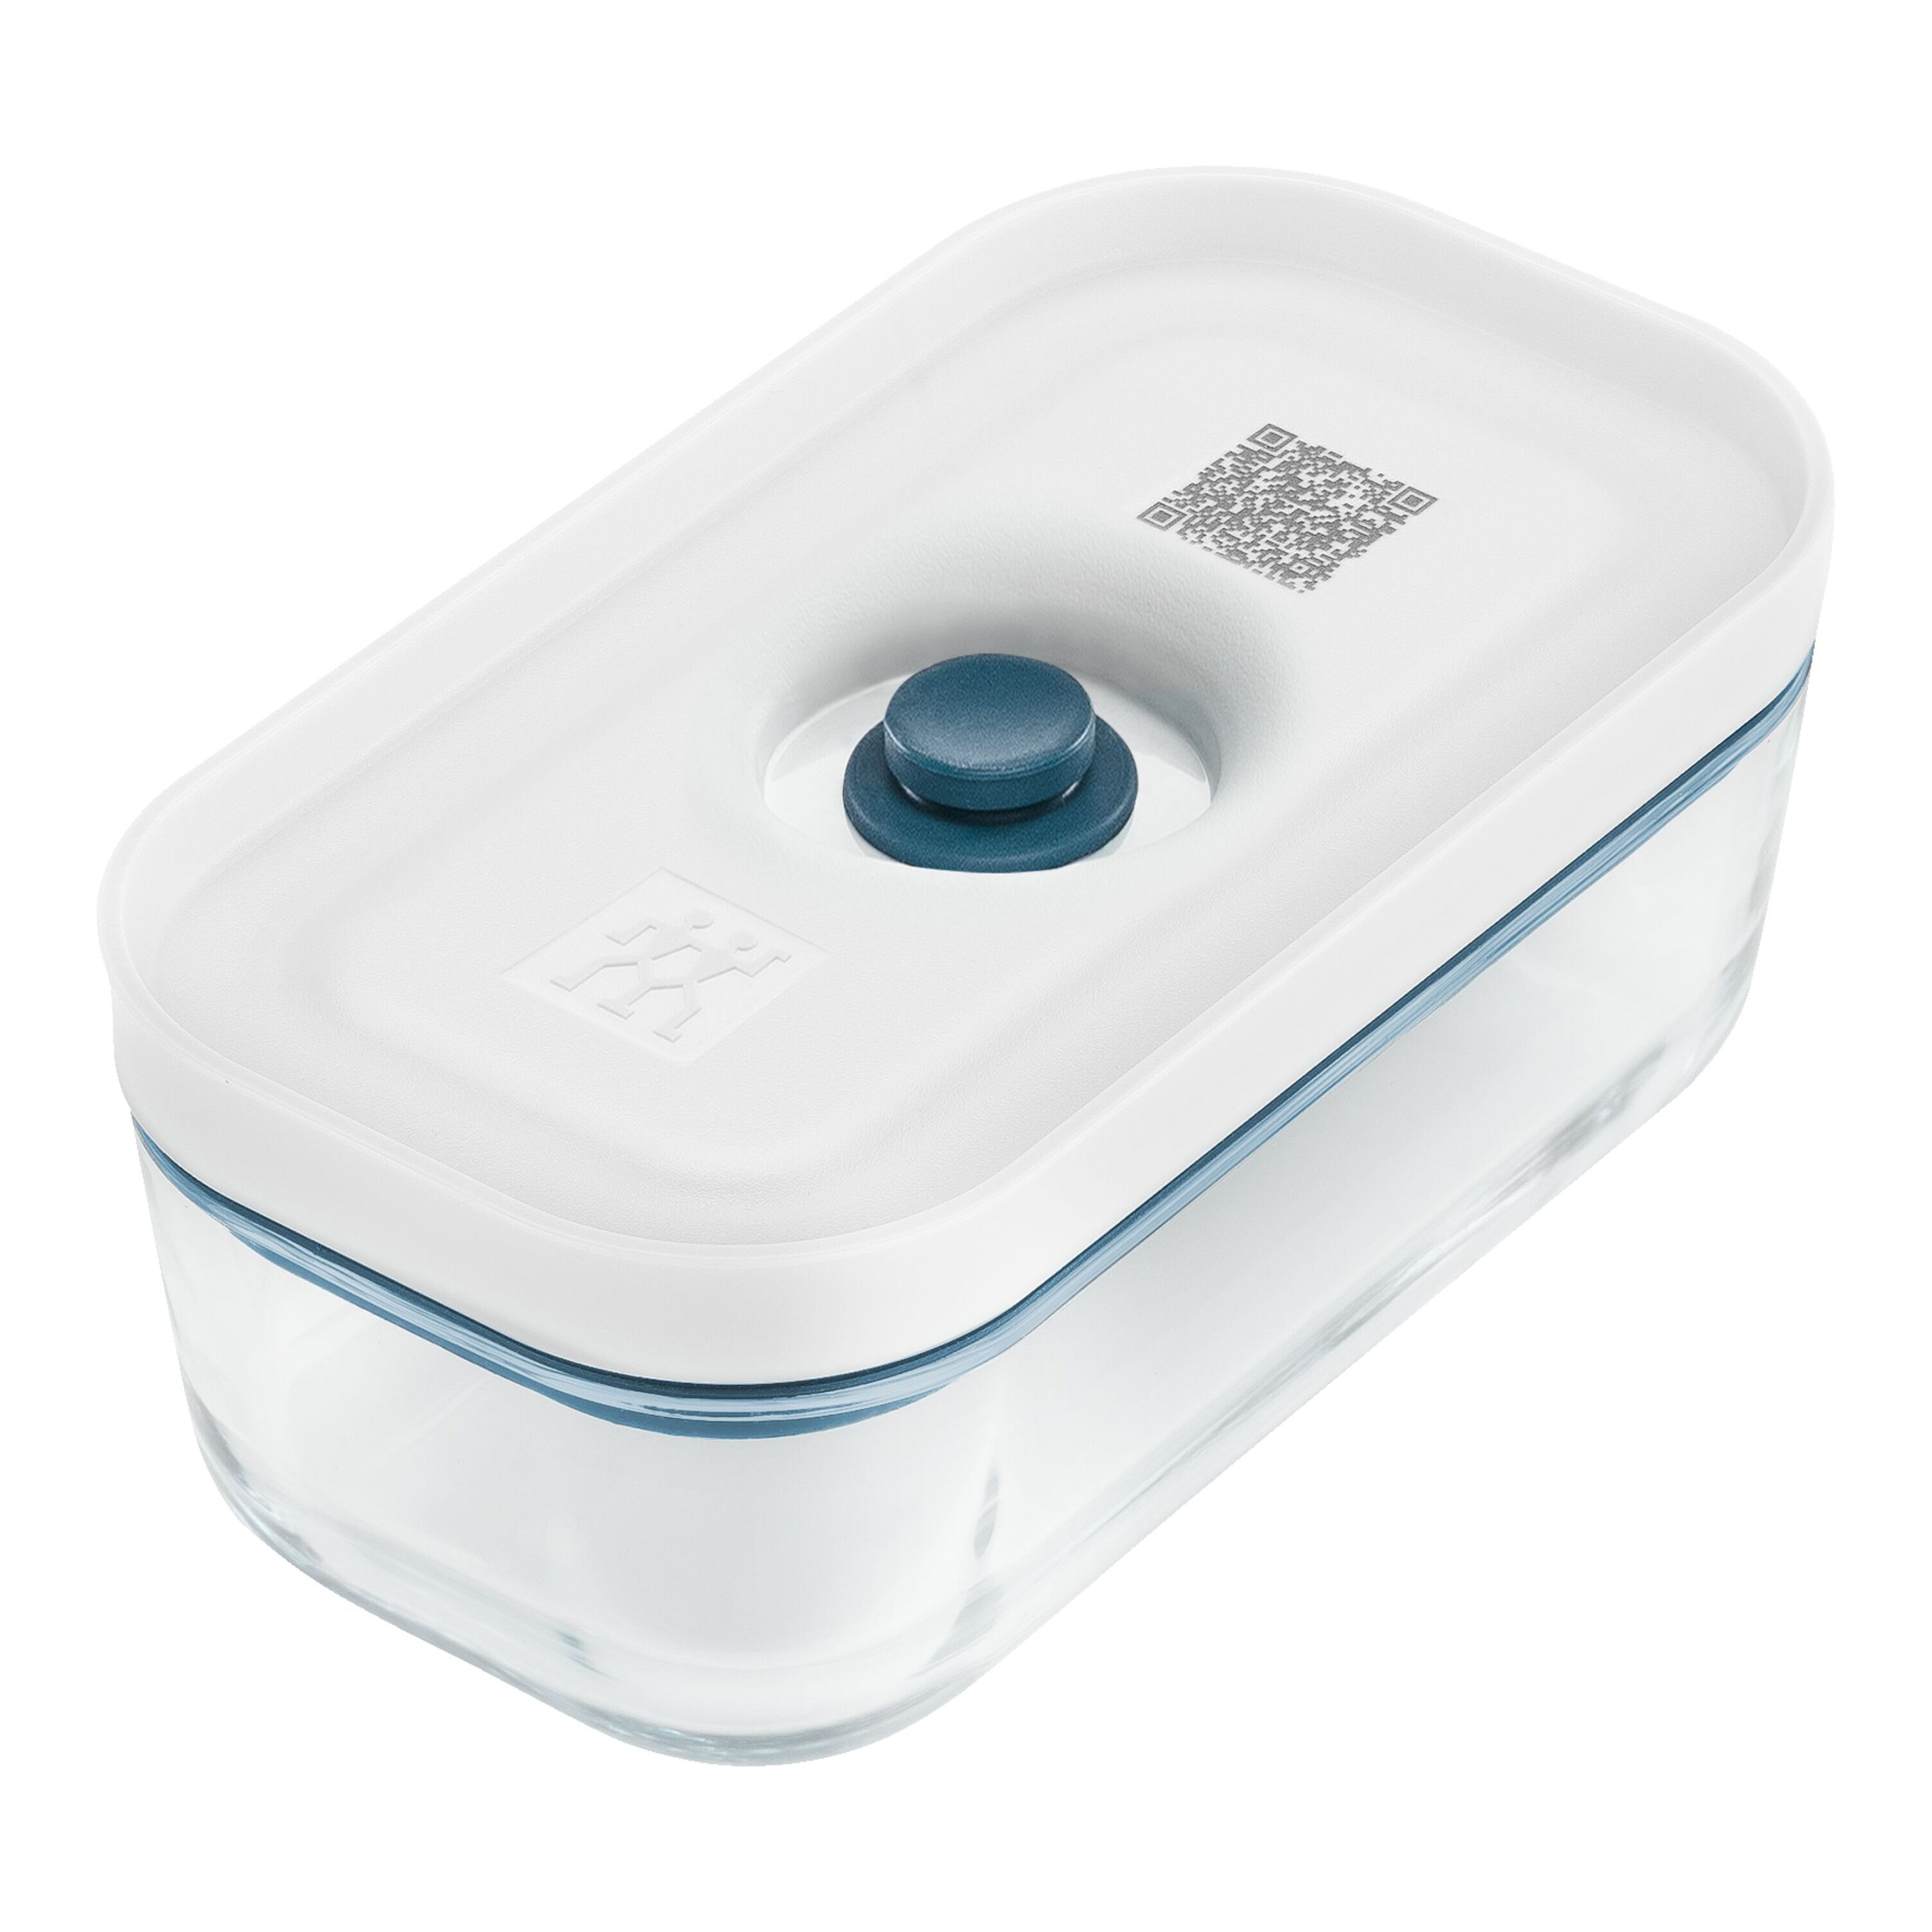 Skywin Vacuum Bread Box Air Tight Storage Container and Serving Tray for Cakes Bagels and Bread Loaves - Automatically Seals and Keeps Pastries Fresh